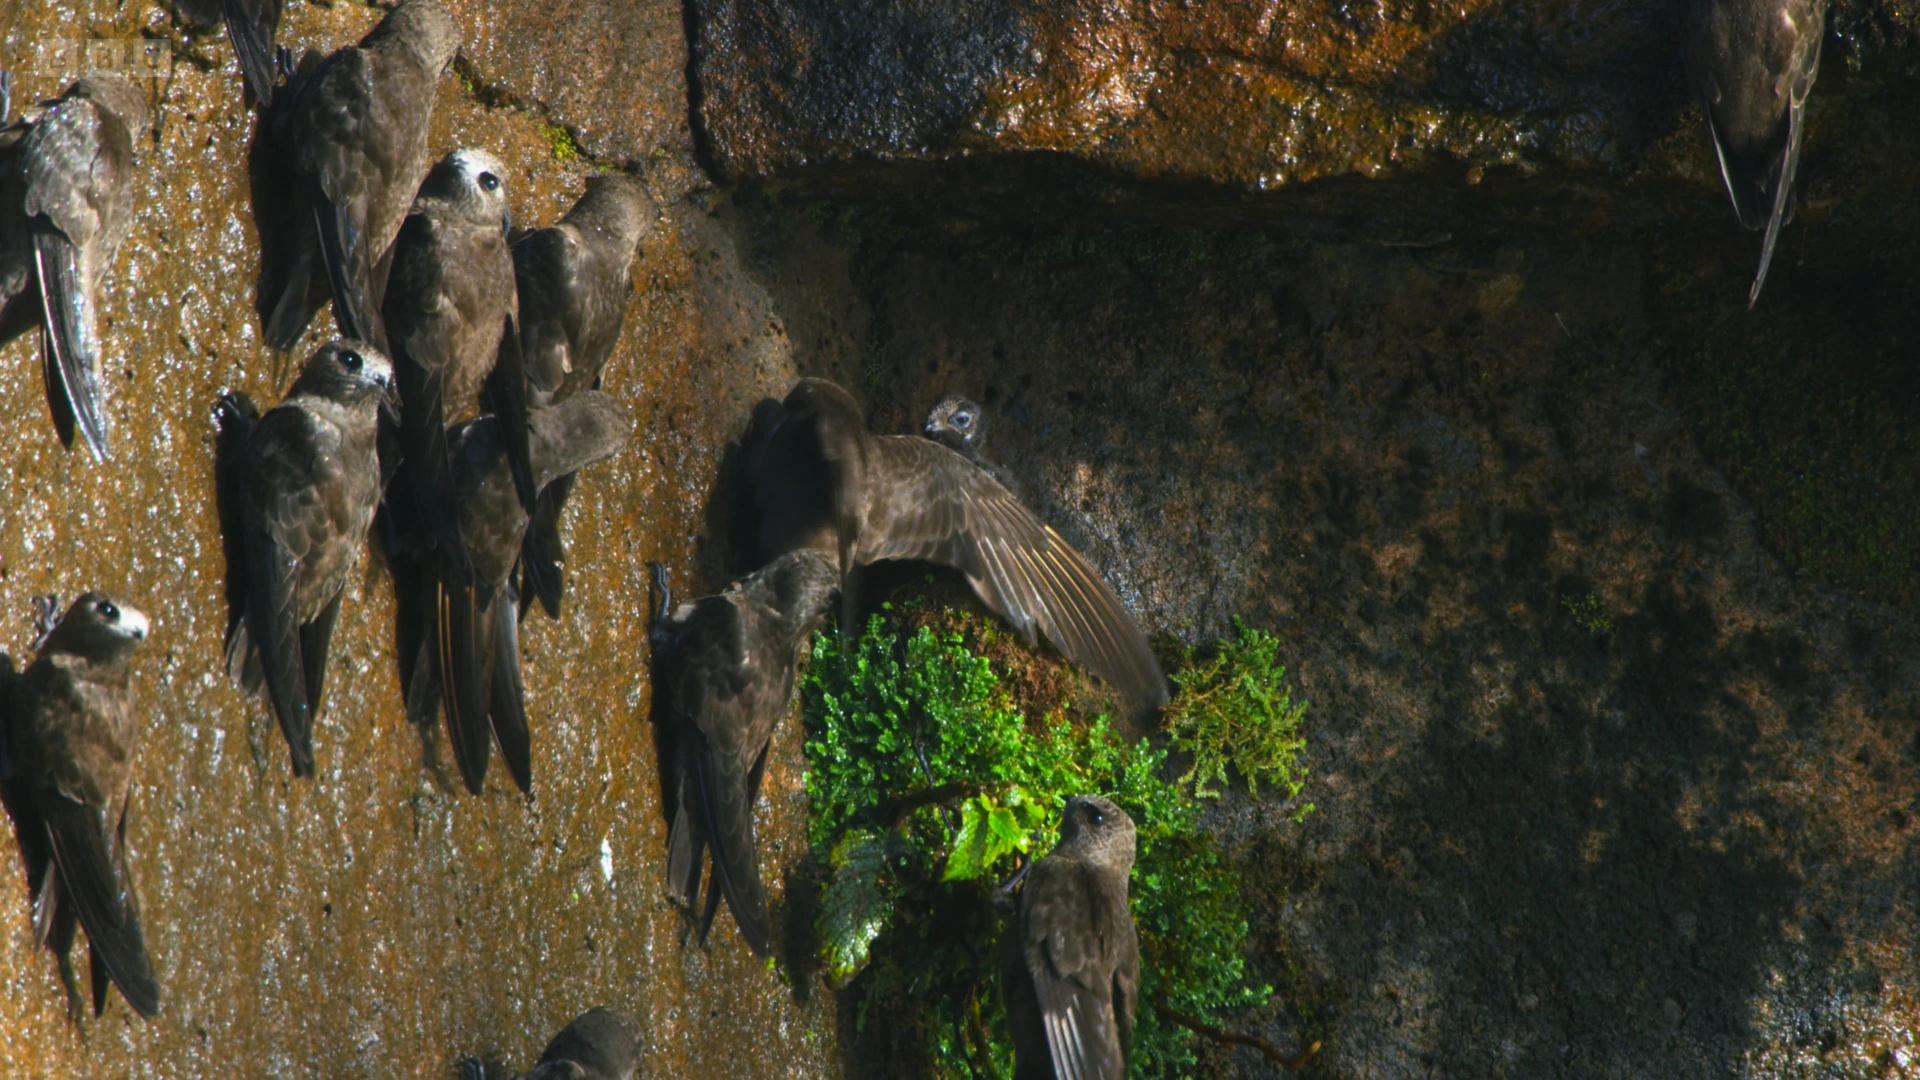 Great dusky swift (Cypseloides senex) as shown in Seven Worlds, One Planet - South America